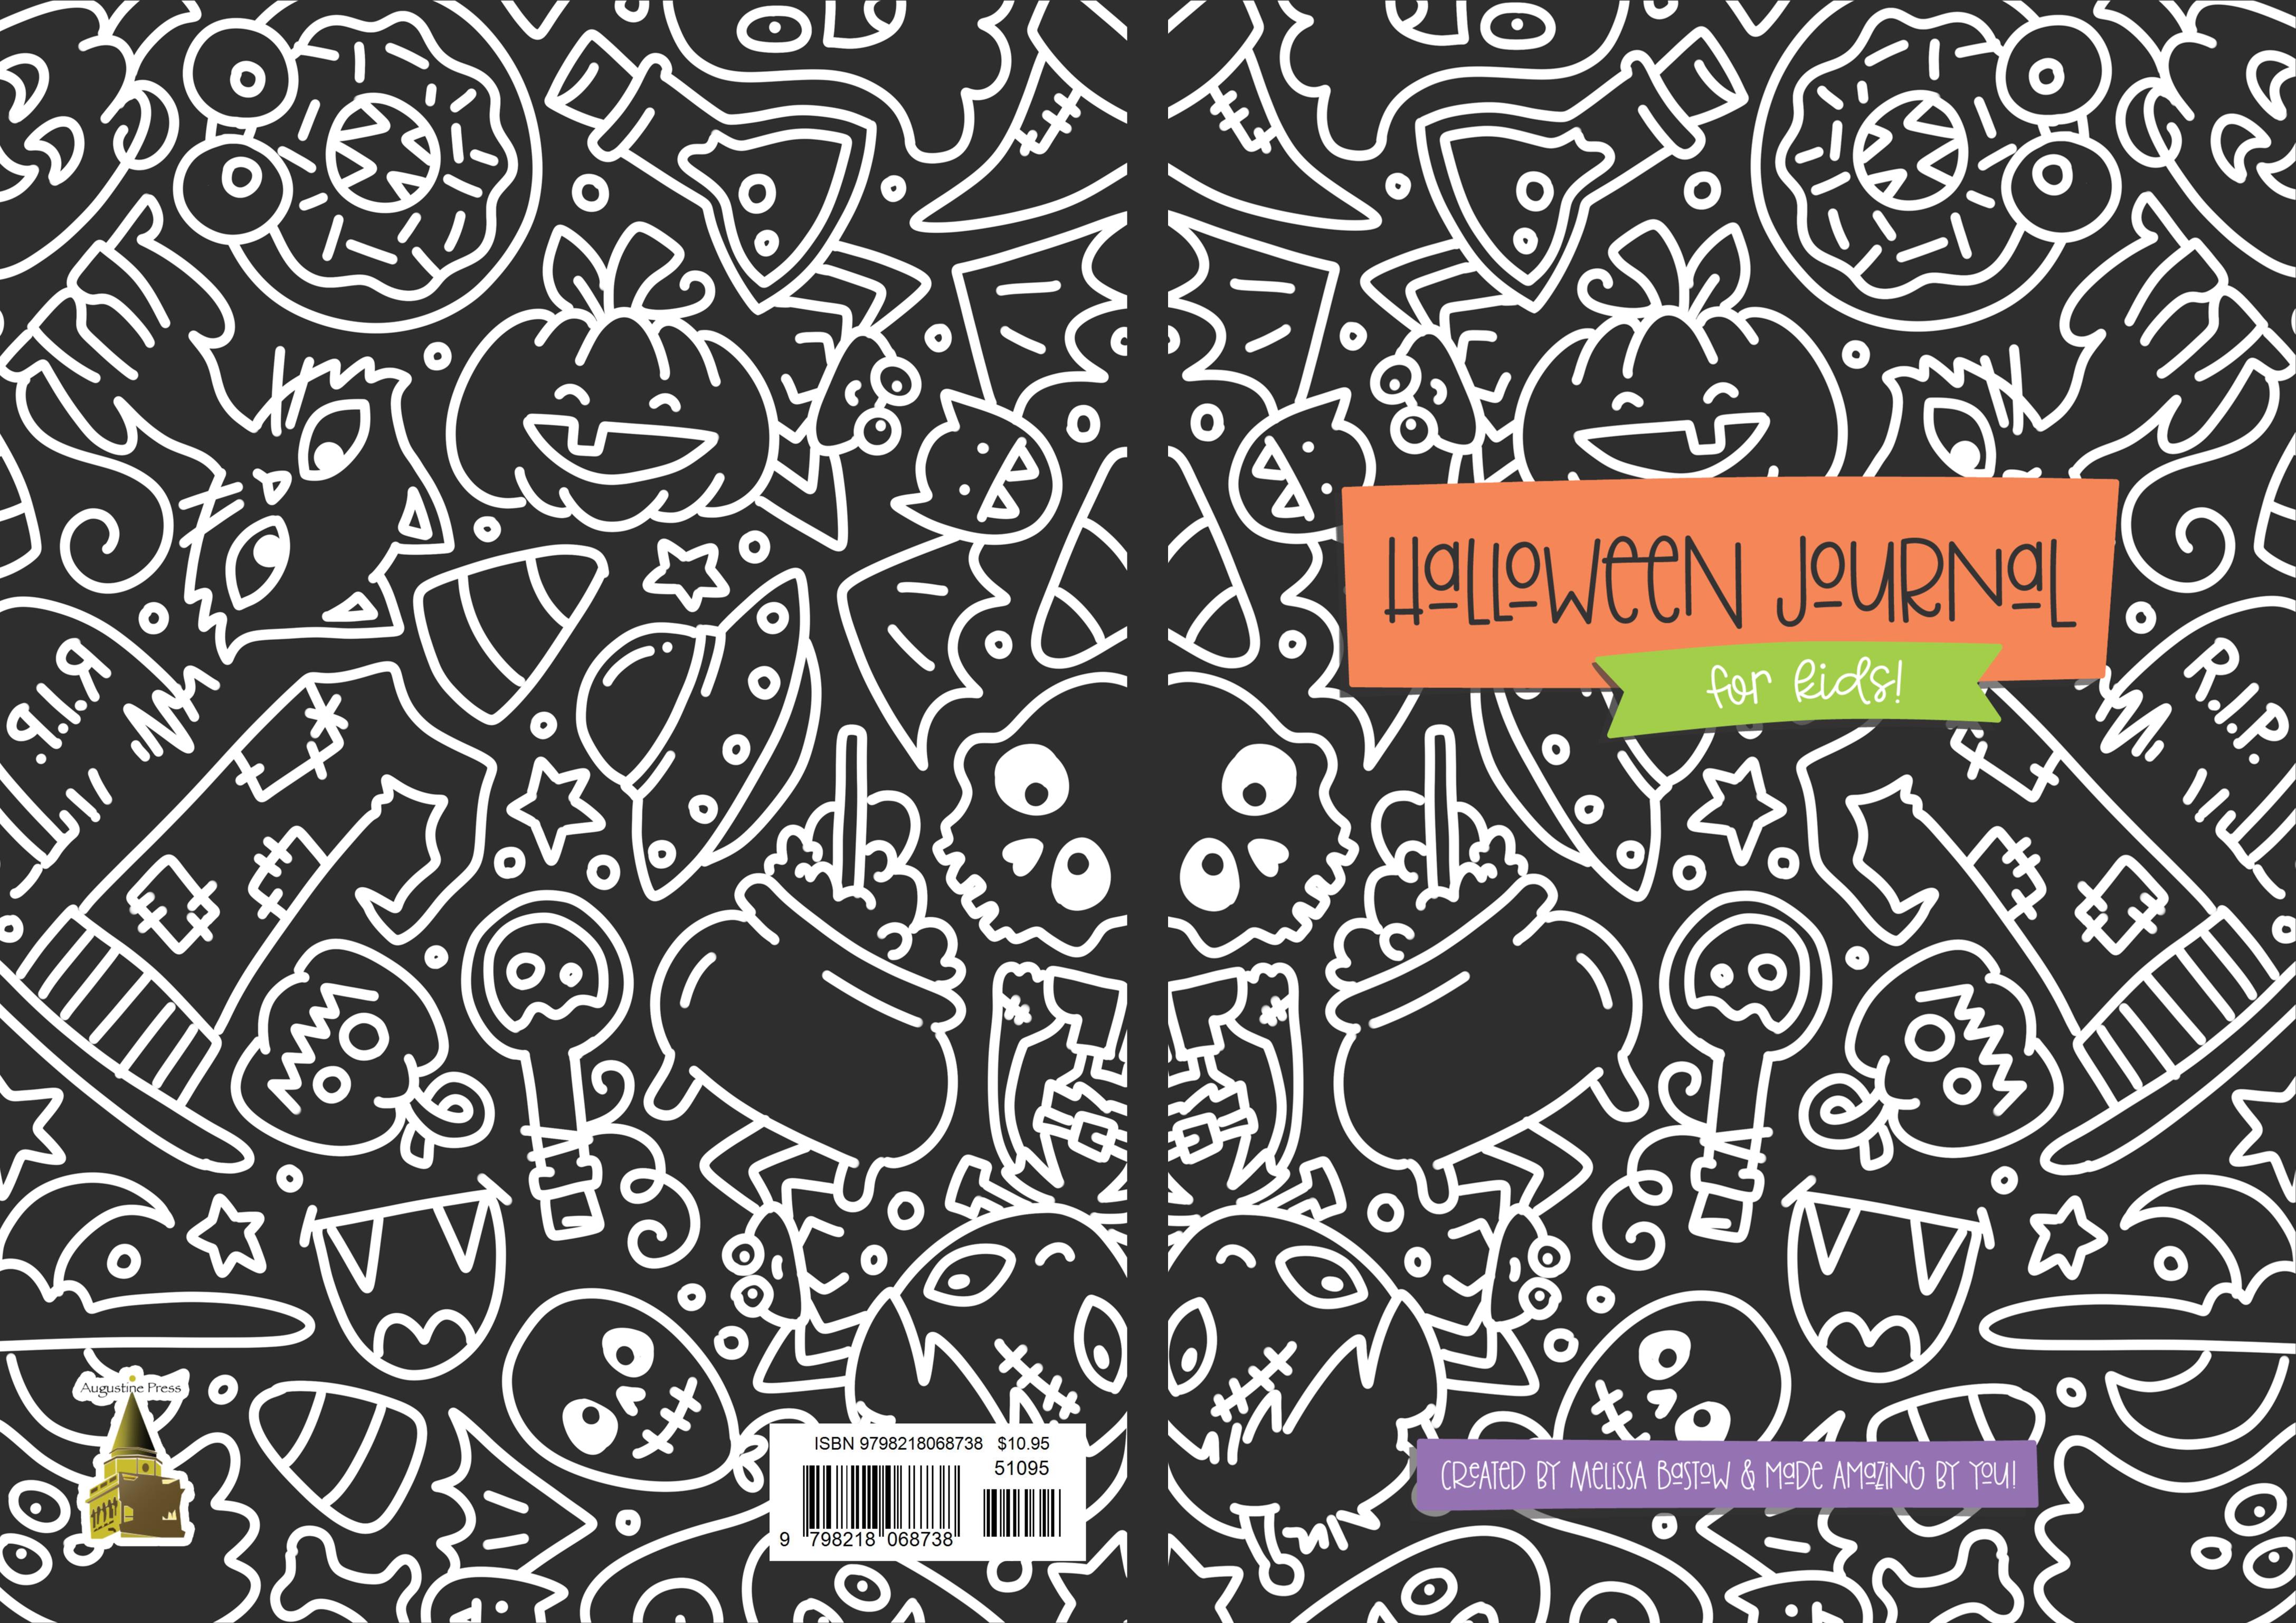 Halloween Journal and Activity Book: Spooky Cute Fun for Kids cover image